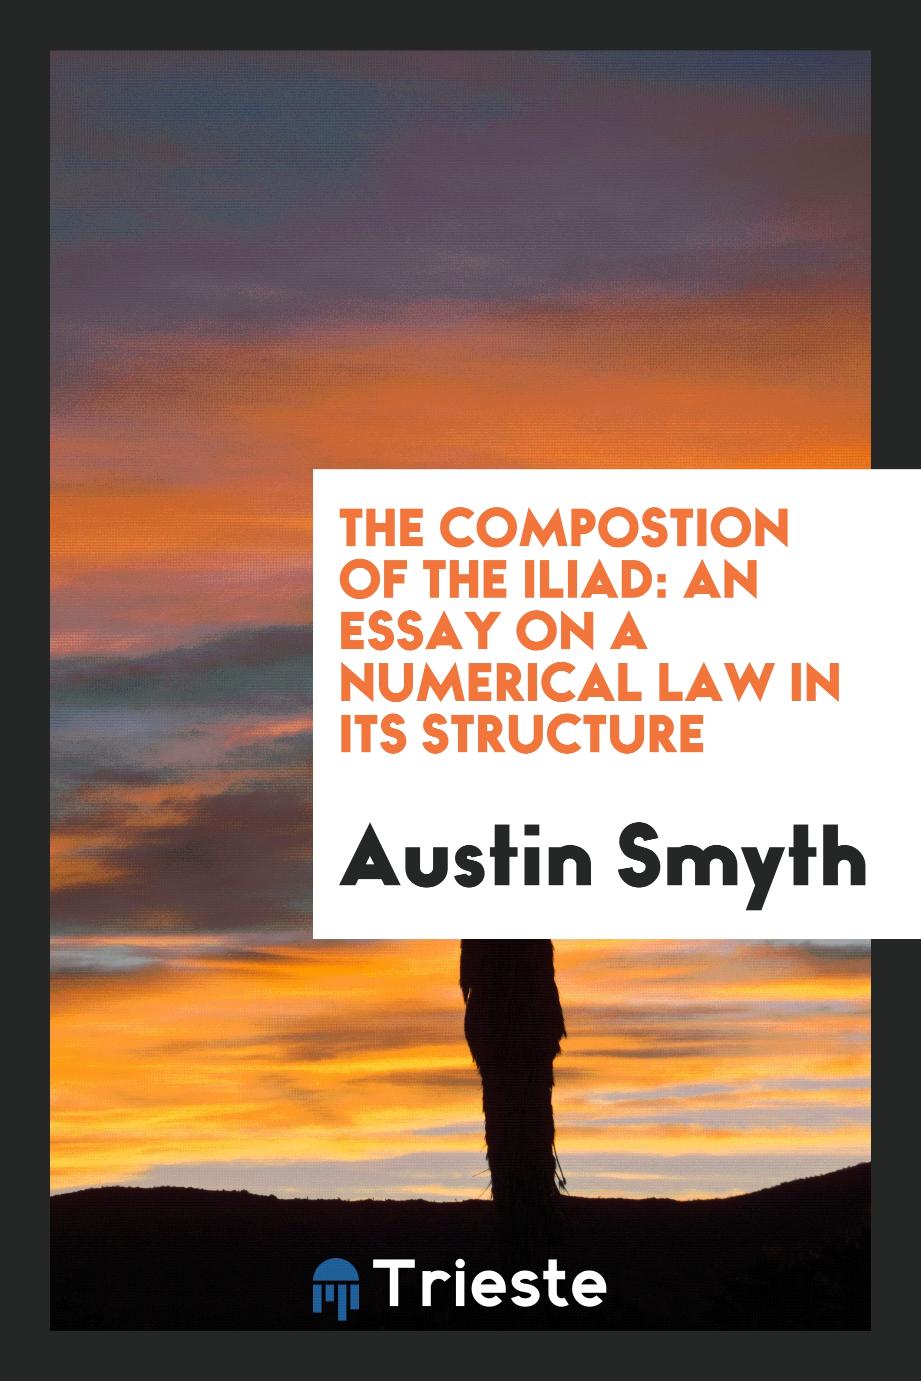 The compostion of the Iliad: an essay on a numerical law in its structure